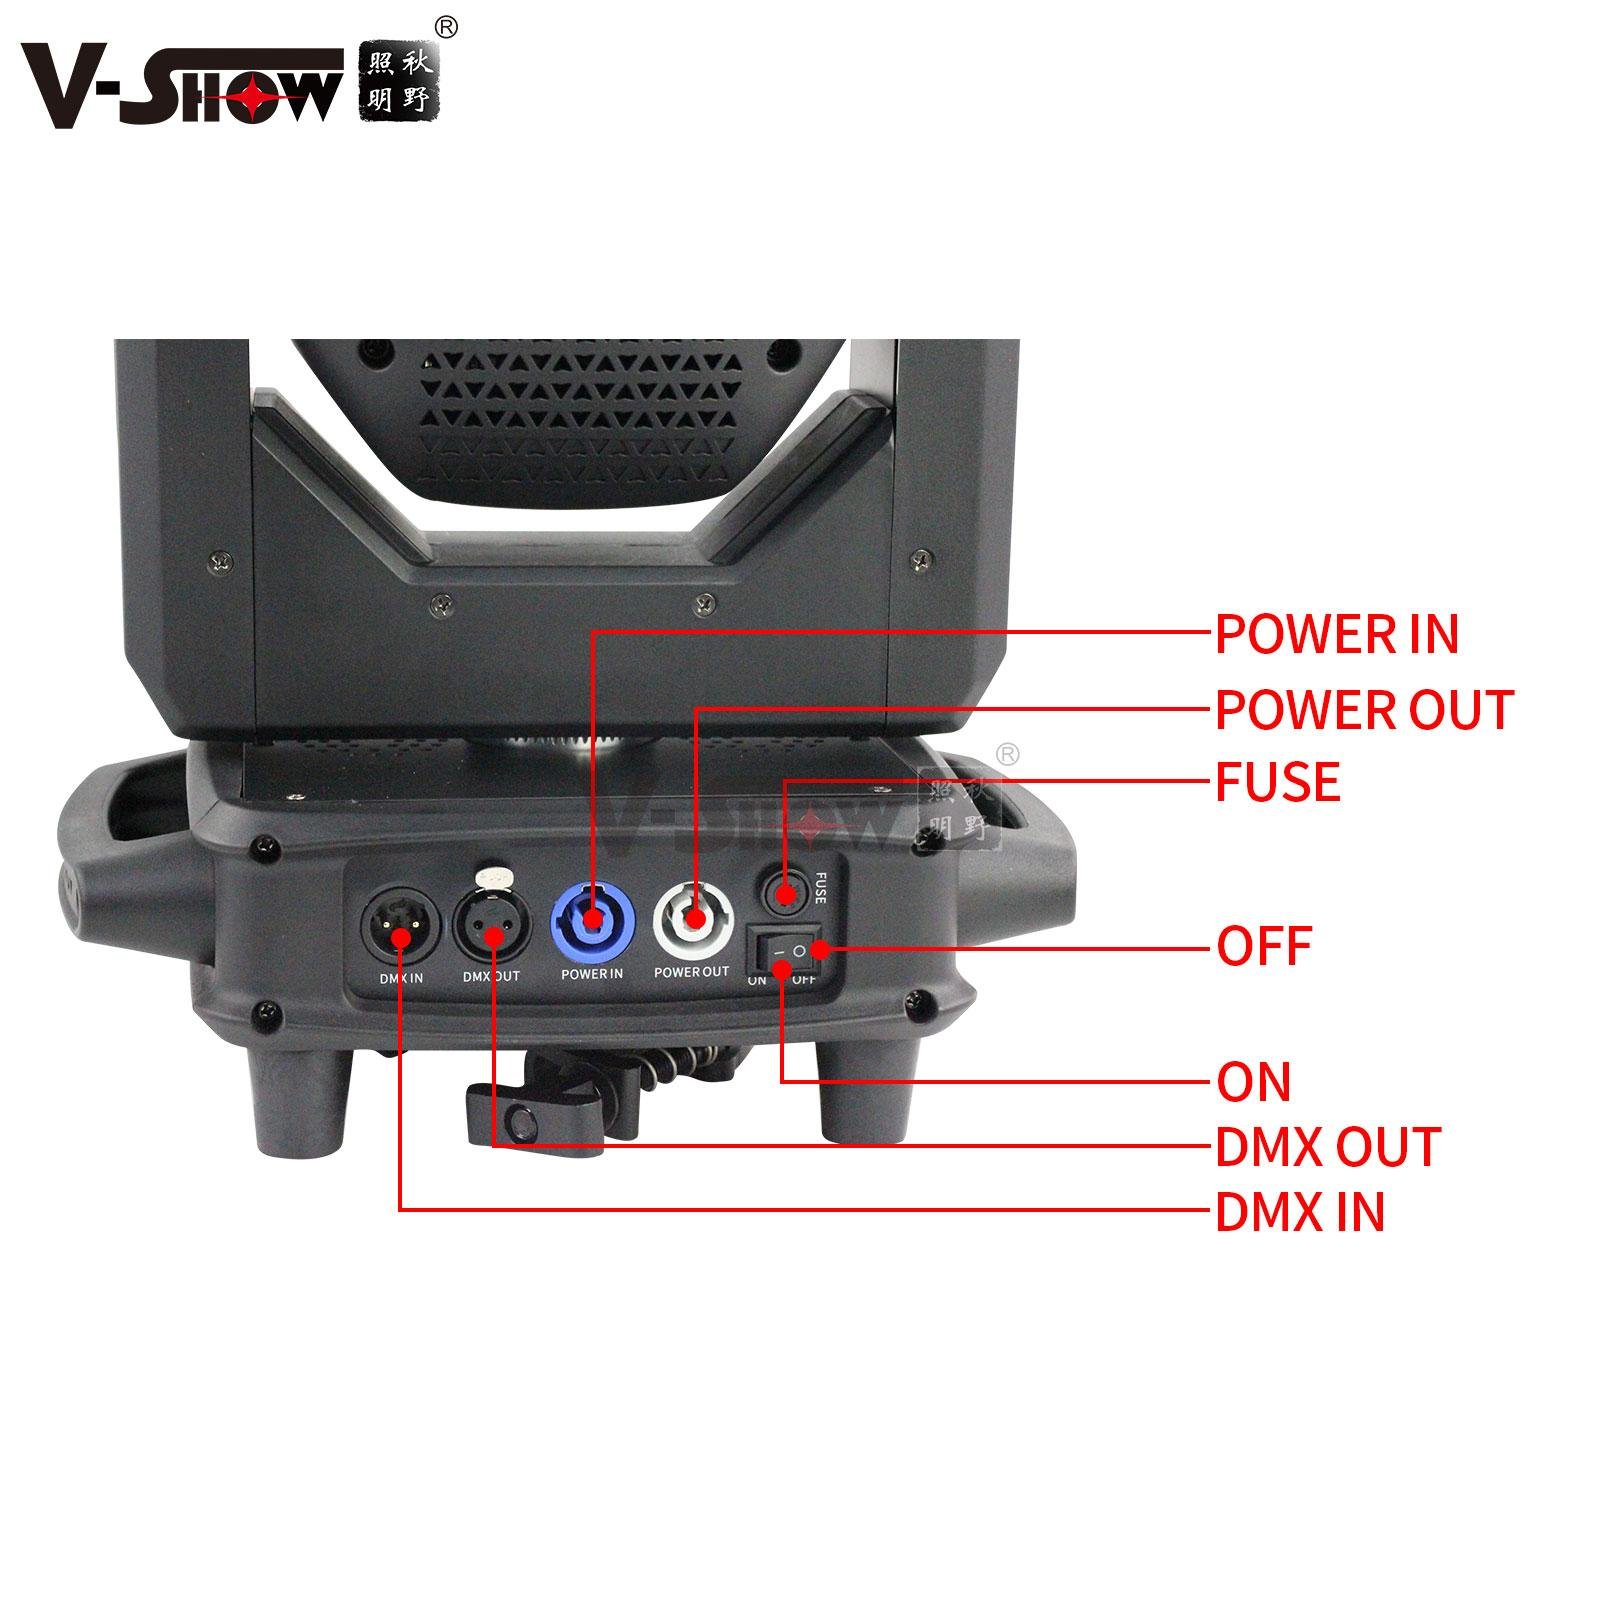 V-Show 2022 New arrive S718 150W Spot LED Moving Head for stage light 2